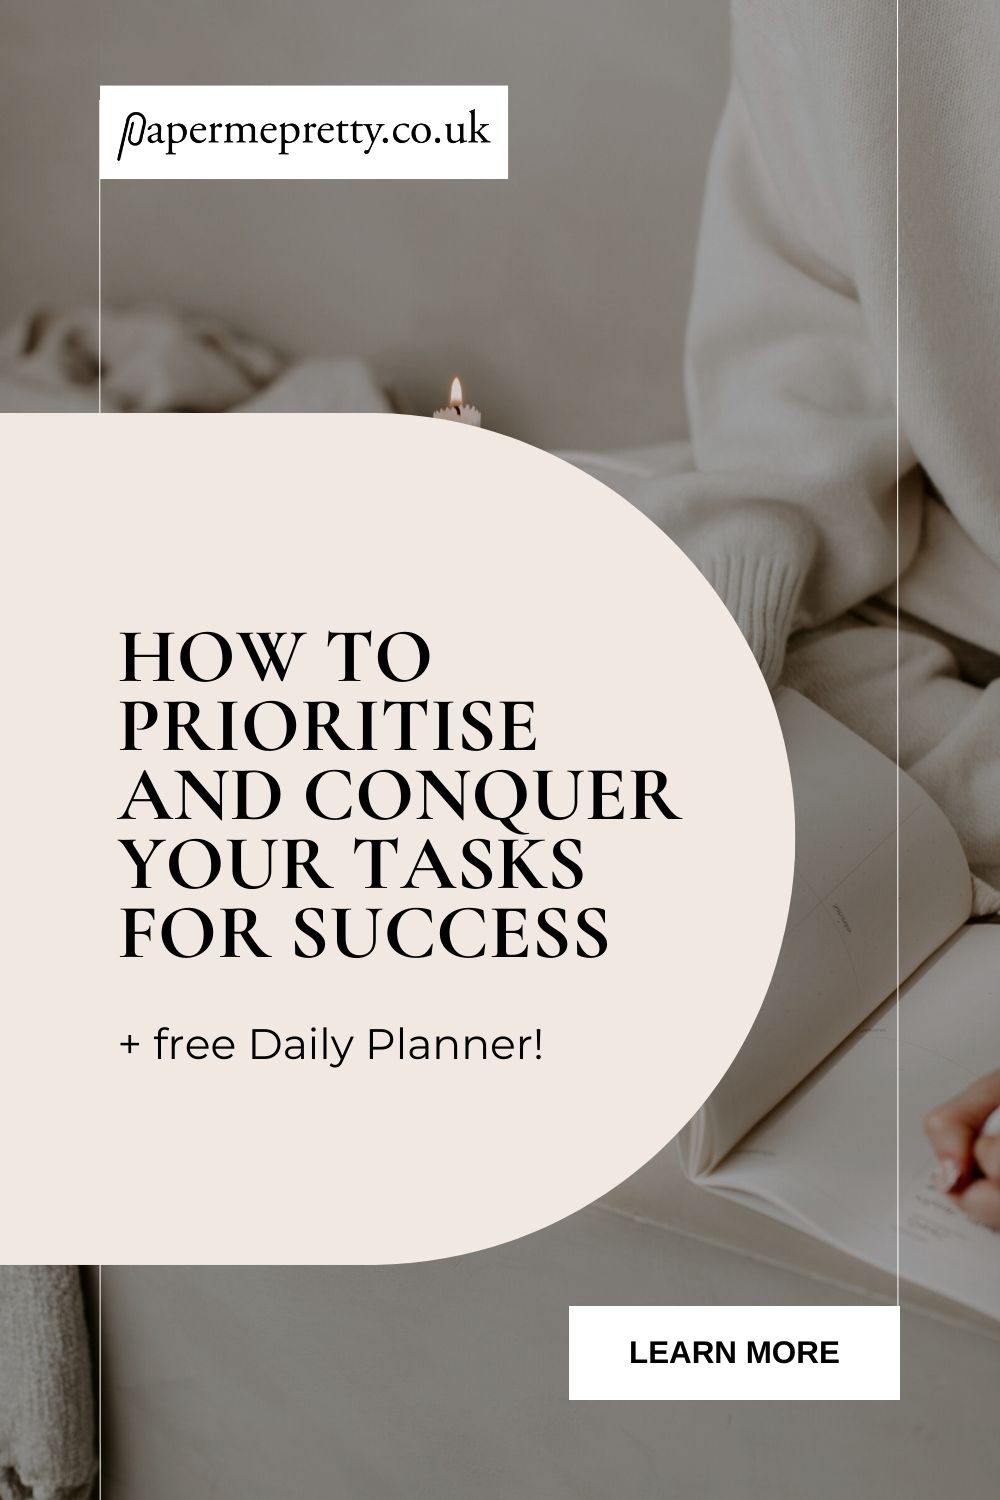 Supercharge your productivity and achieve your goals with ease by mastering the art of task prioritisation and conquering your daily To-Do list. Plus, get a FREE Daily Planner inside this post! #planner #productivity #todolist #goals